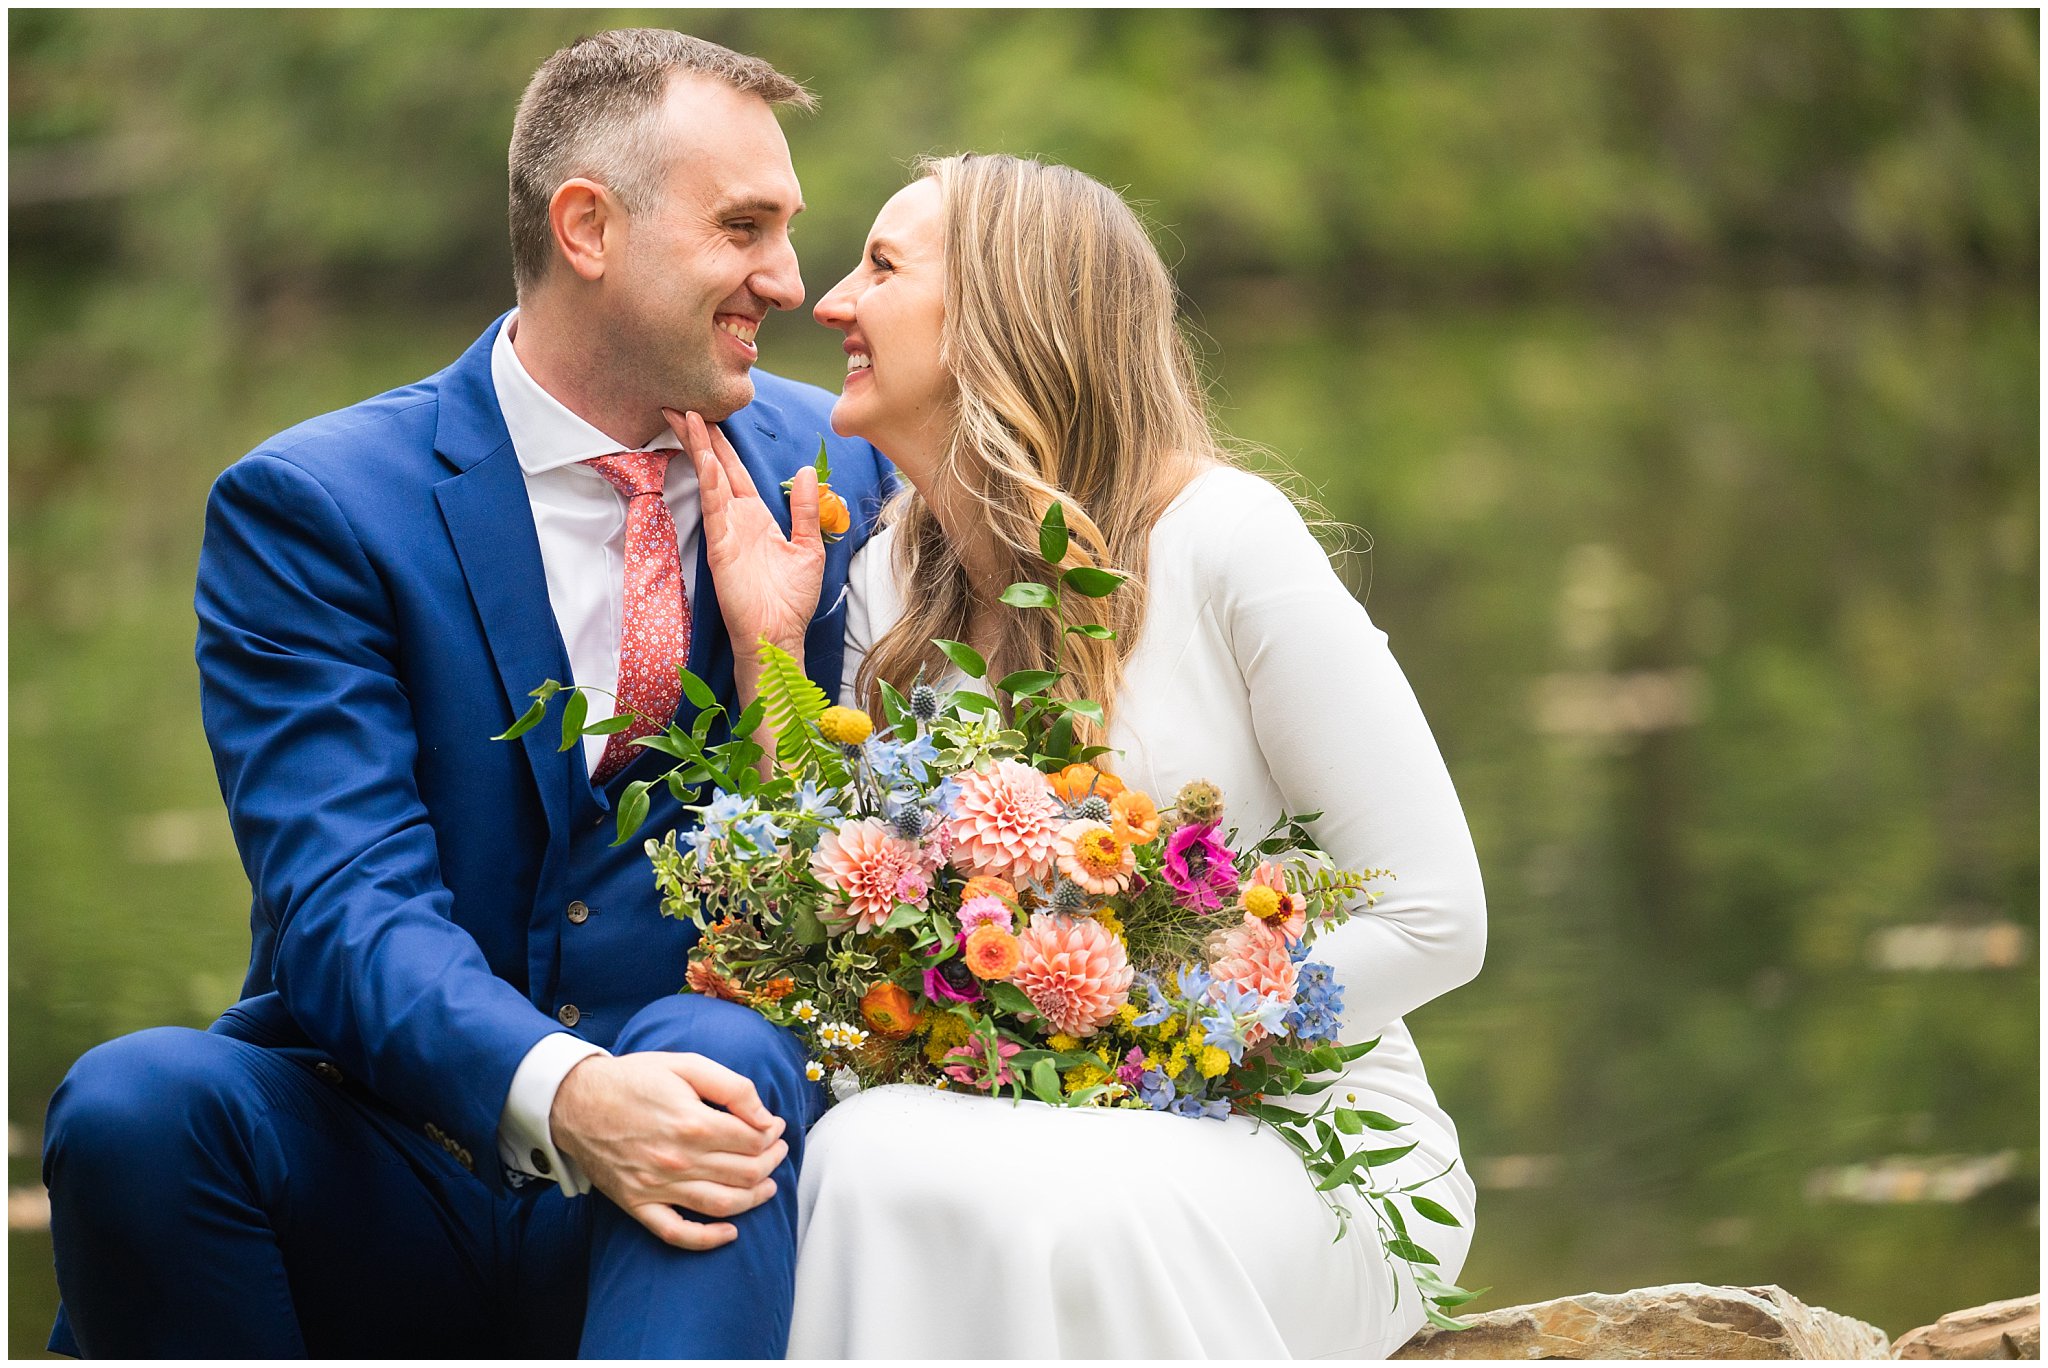 Bride and groom portraits with an elegant fitted dress and blue suit with coral tie, and wildflower bouquet in the Montana forest and near a pond | Mountainside Weddings Kalispell Montana Destination Wedding | Jessie and Dallin Photography